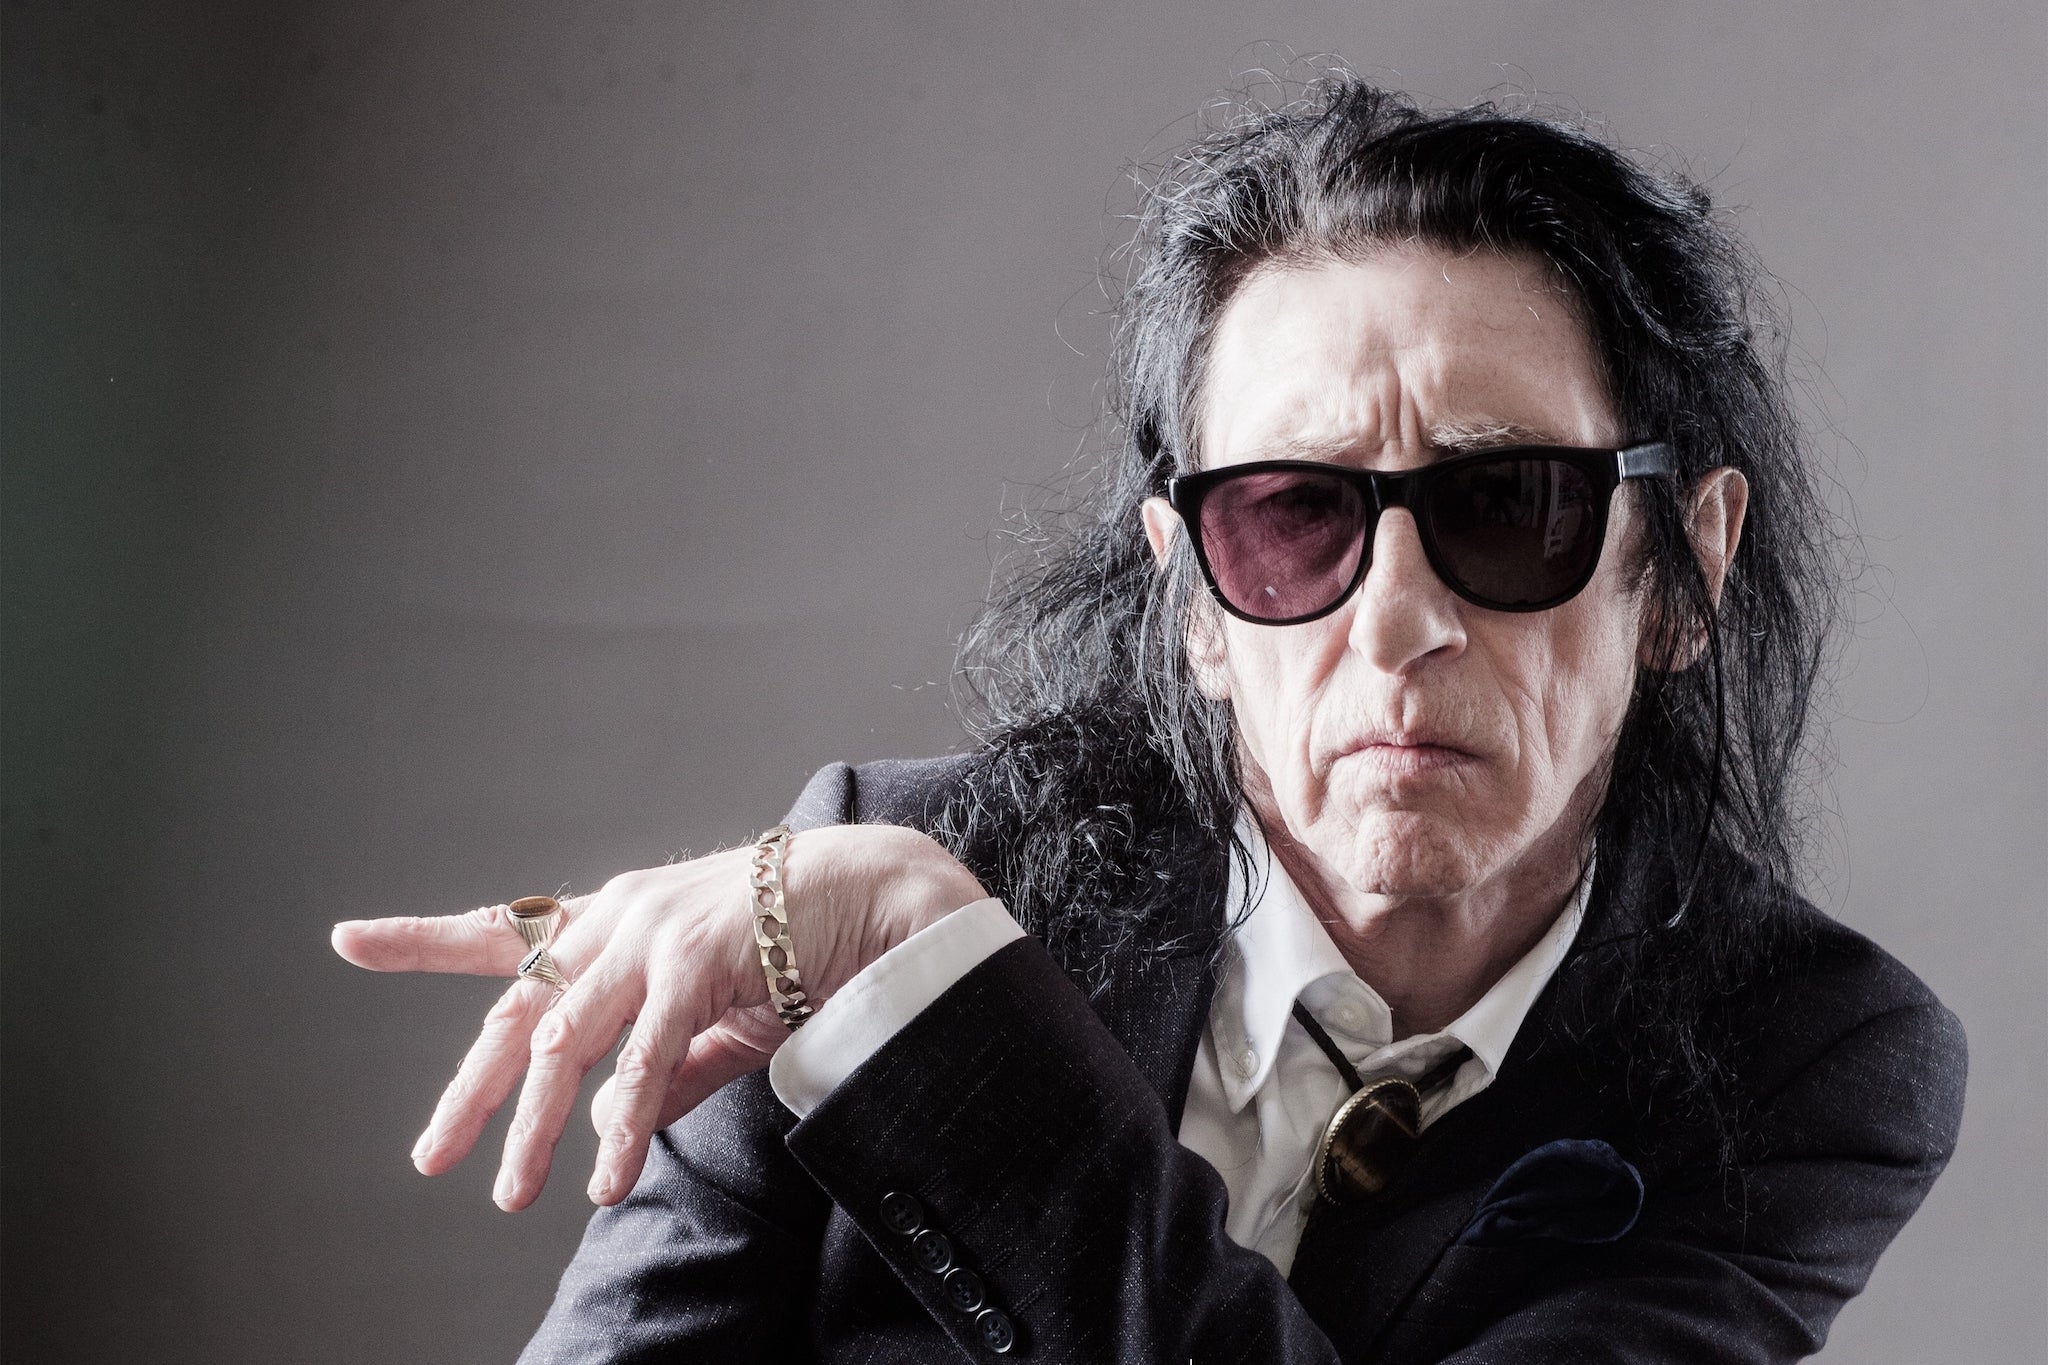 ‘I looked at Ronnie Wood and thought, “He looks good,” so I modelled my style on him,’ says poet John Cooper Clarke